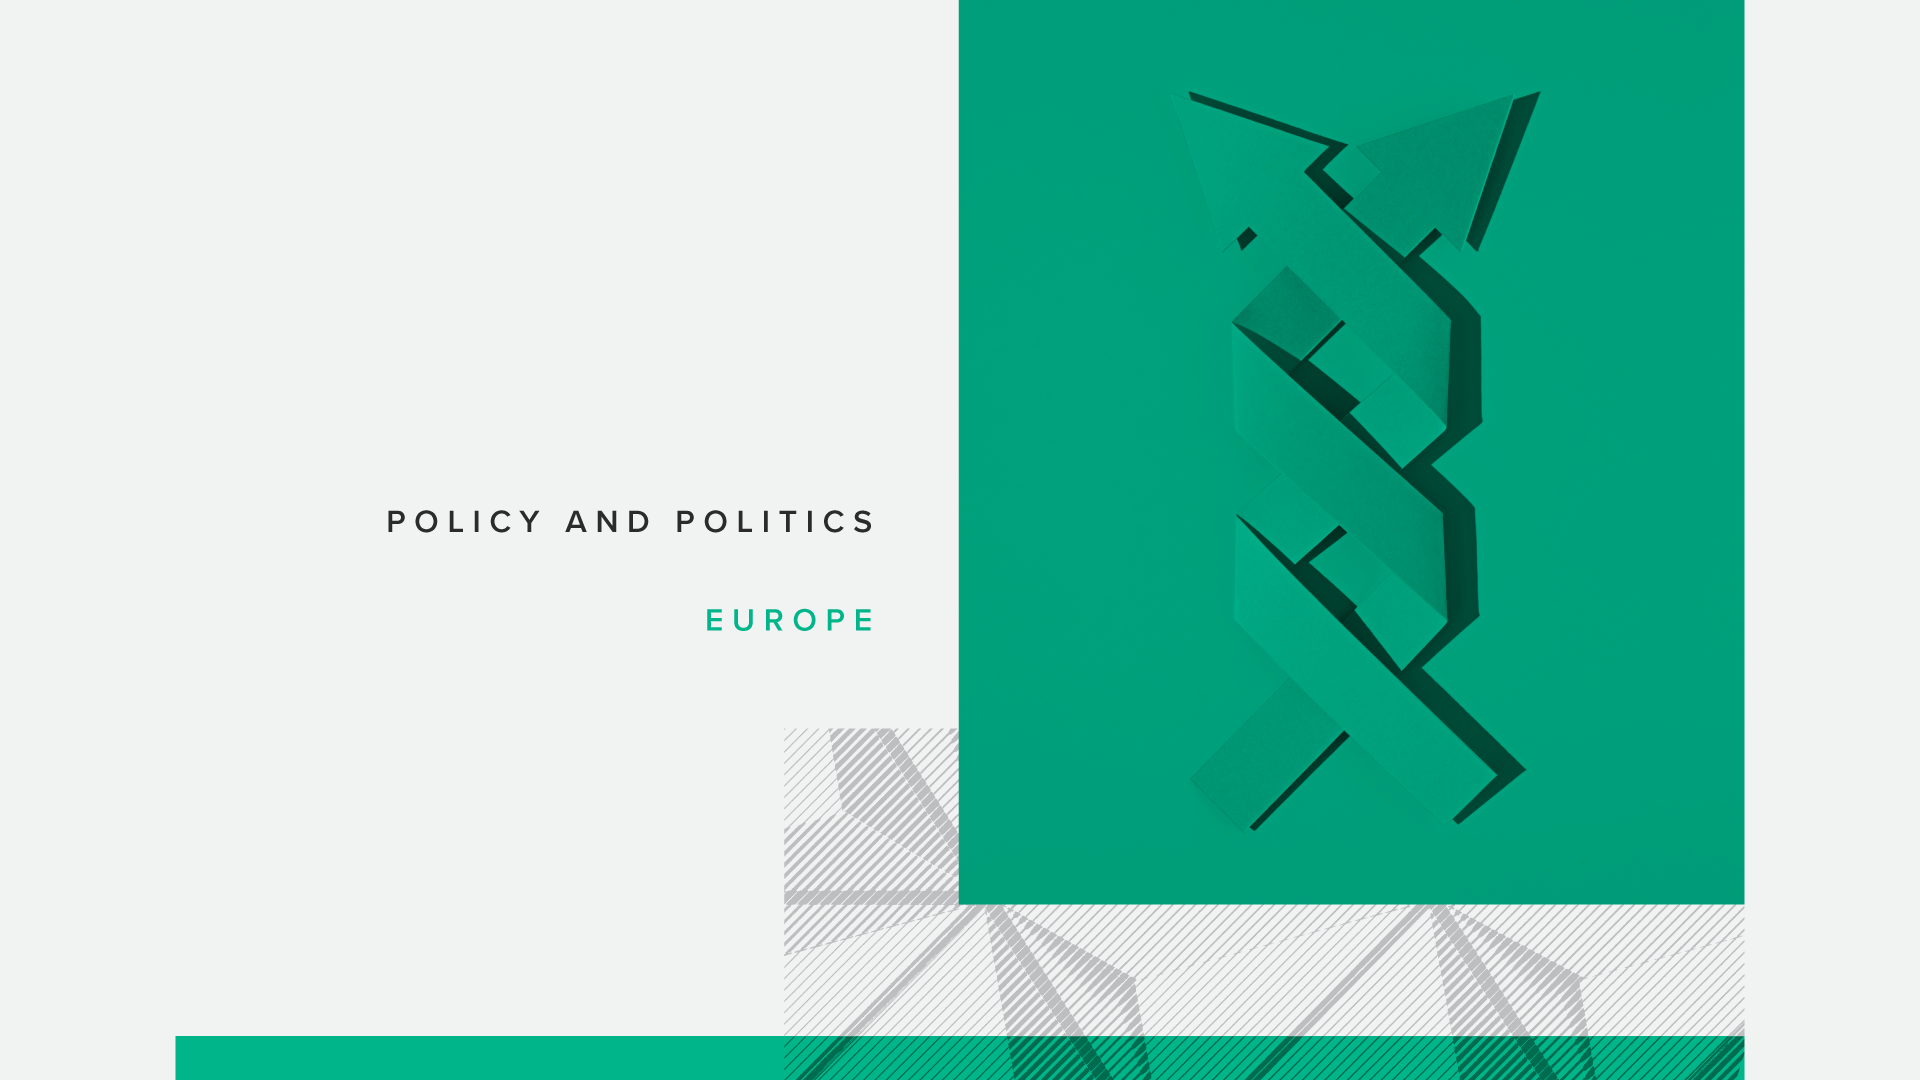 Europe politics and policy report